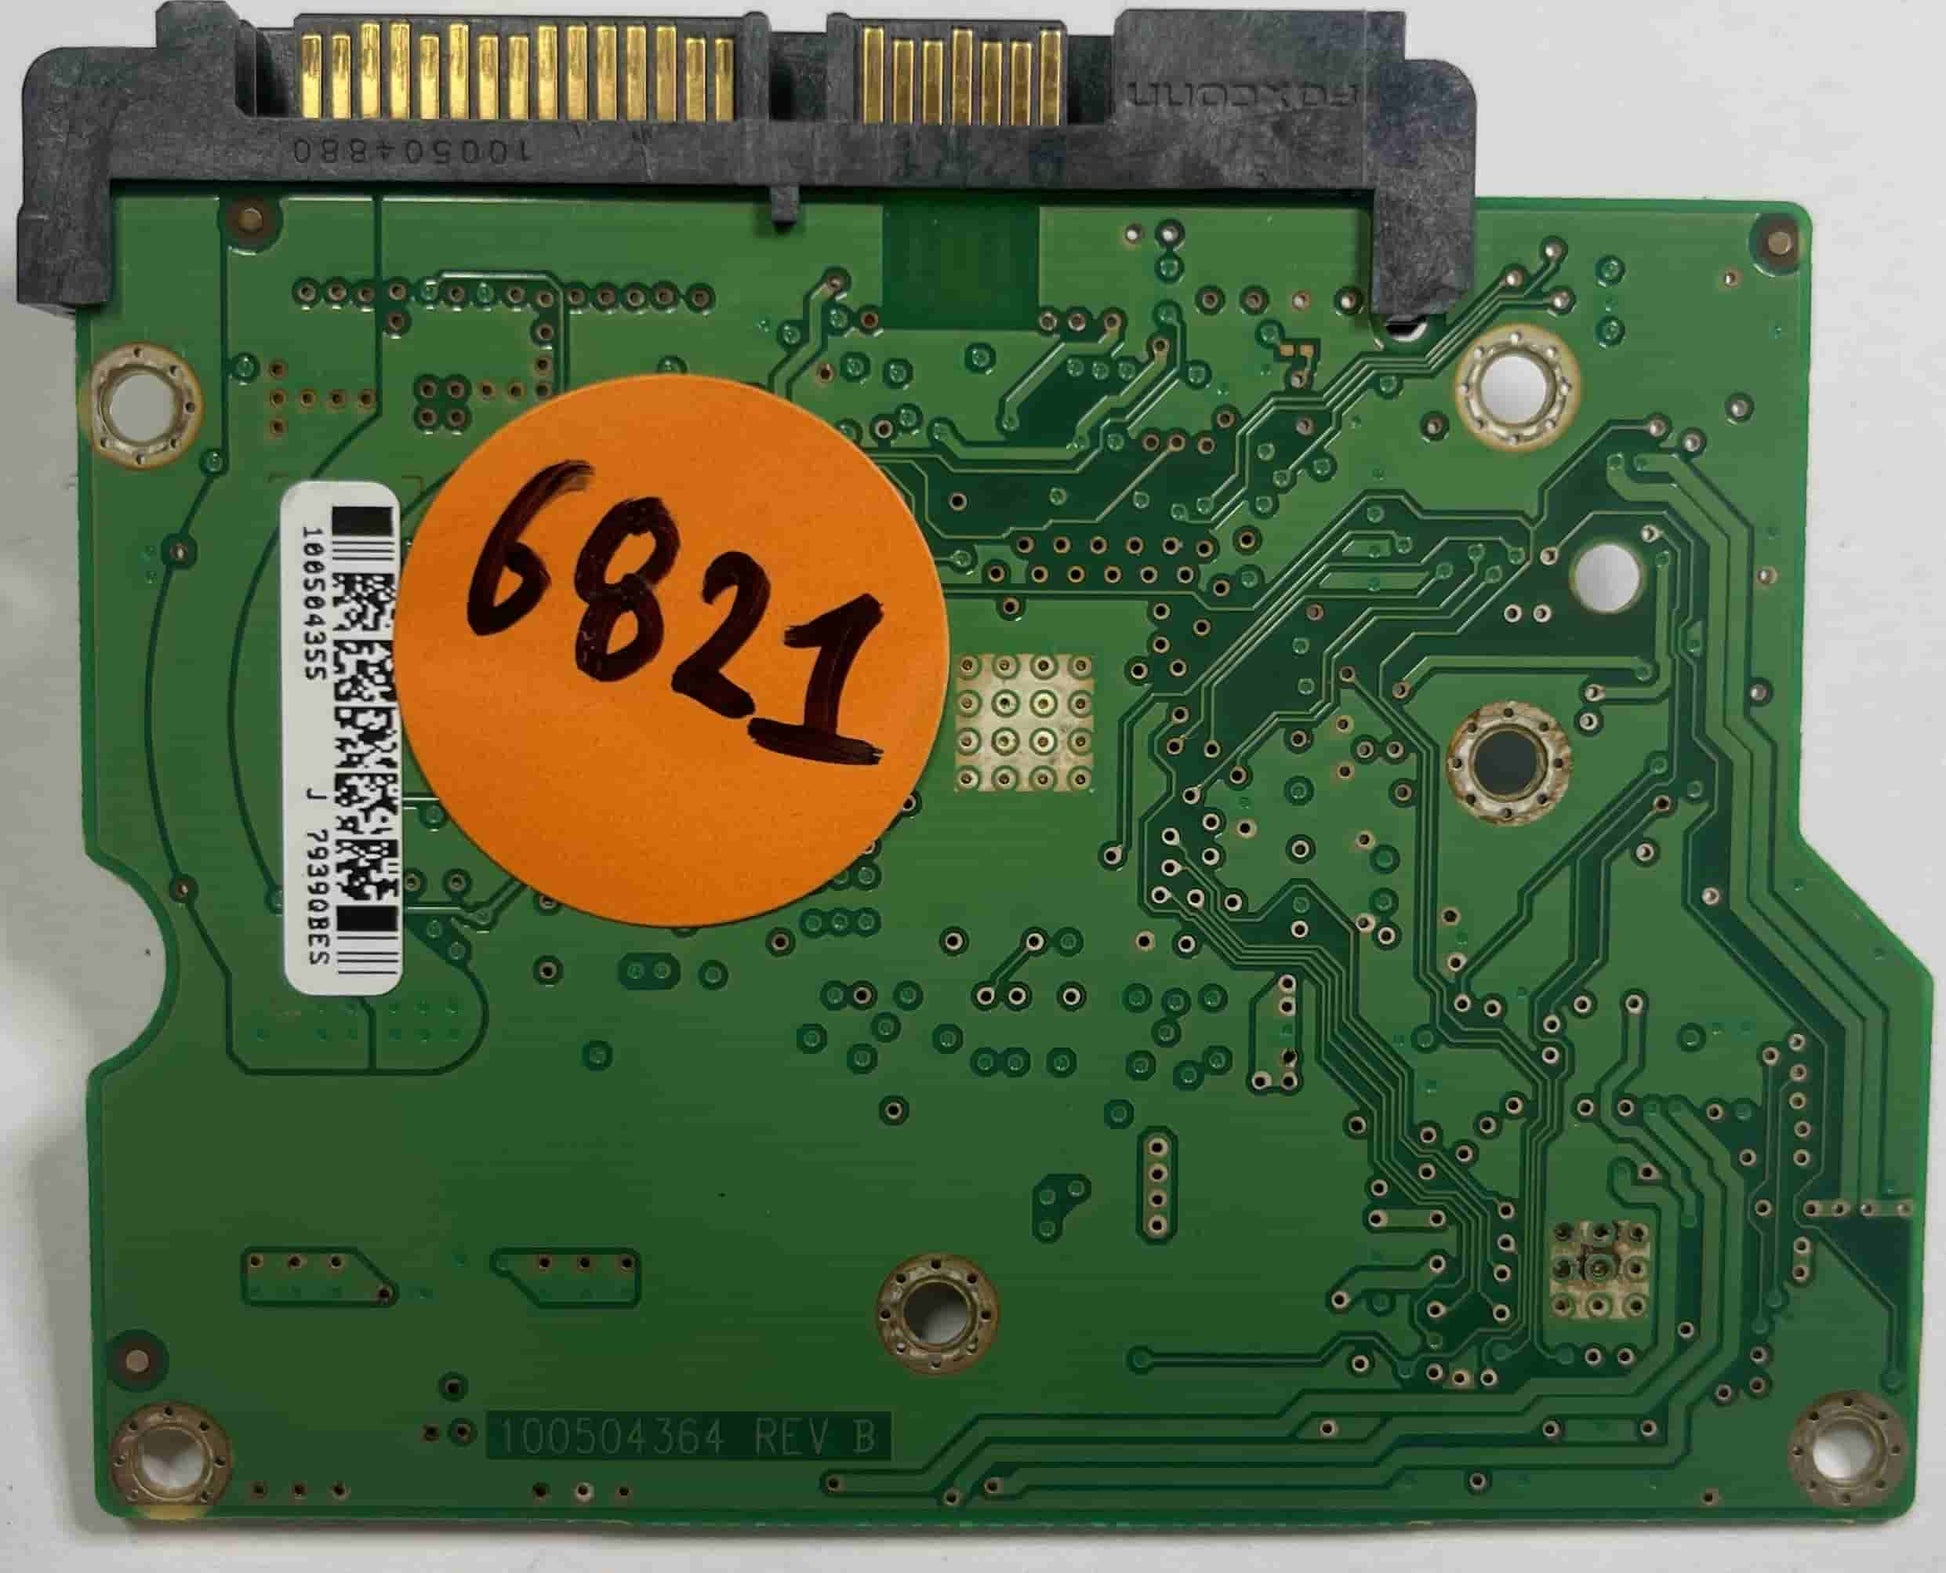 Seagate ST3160813AS 100504364 REV B 9FZ181-302 PCB for Sale